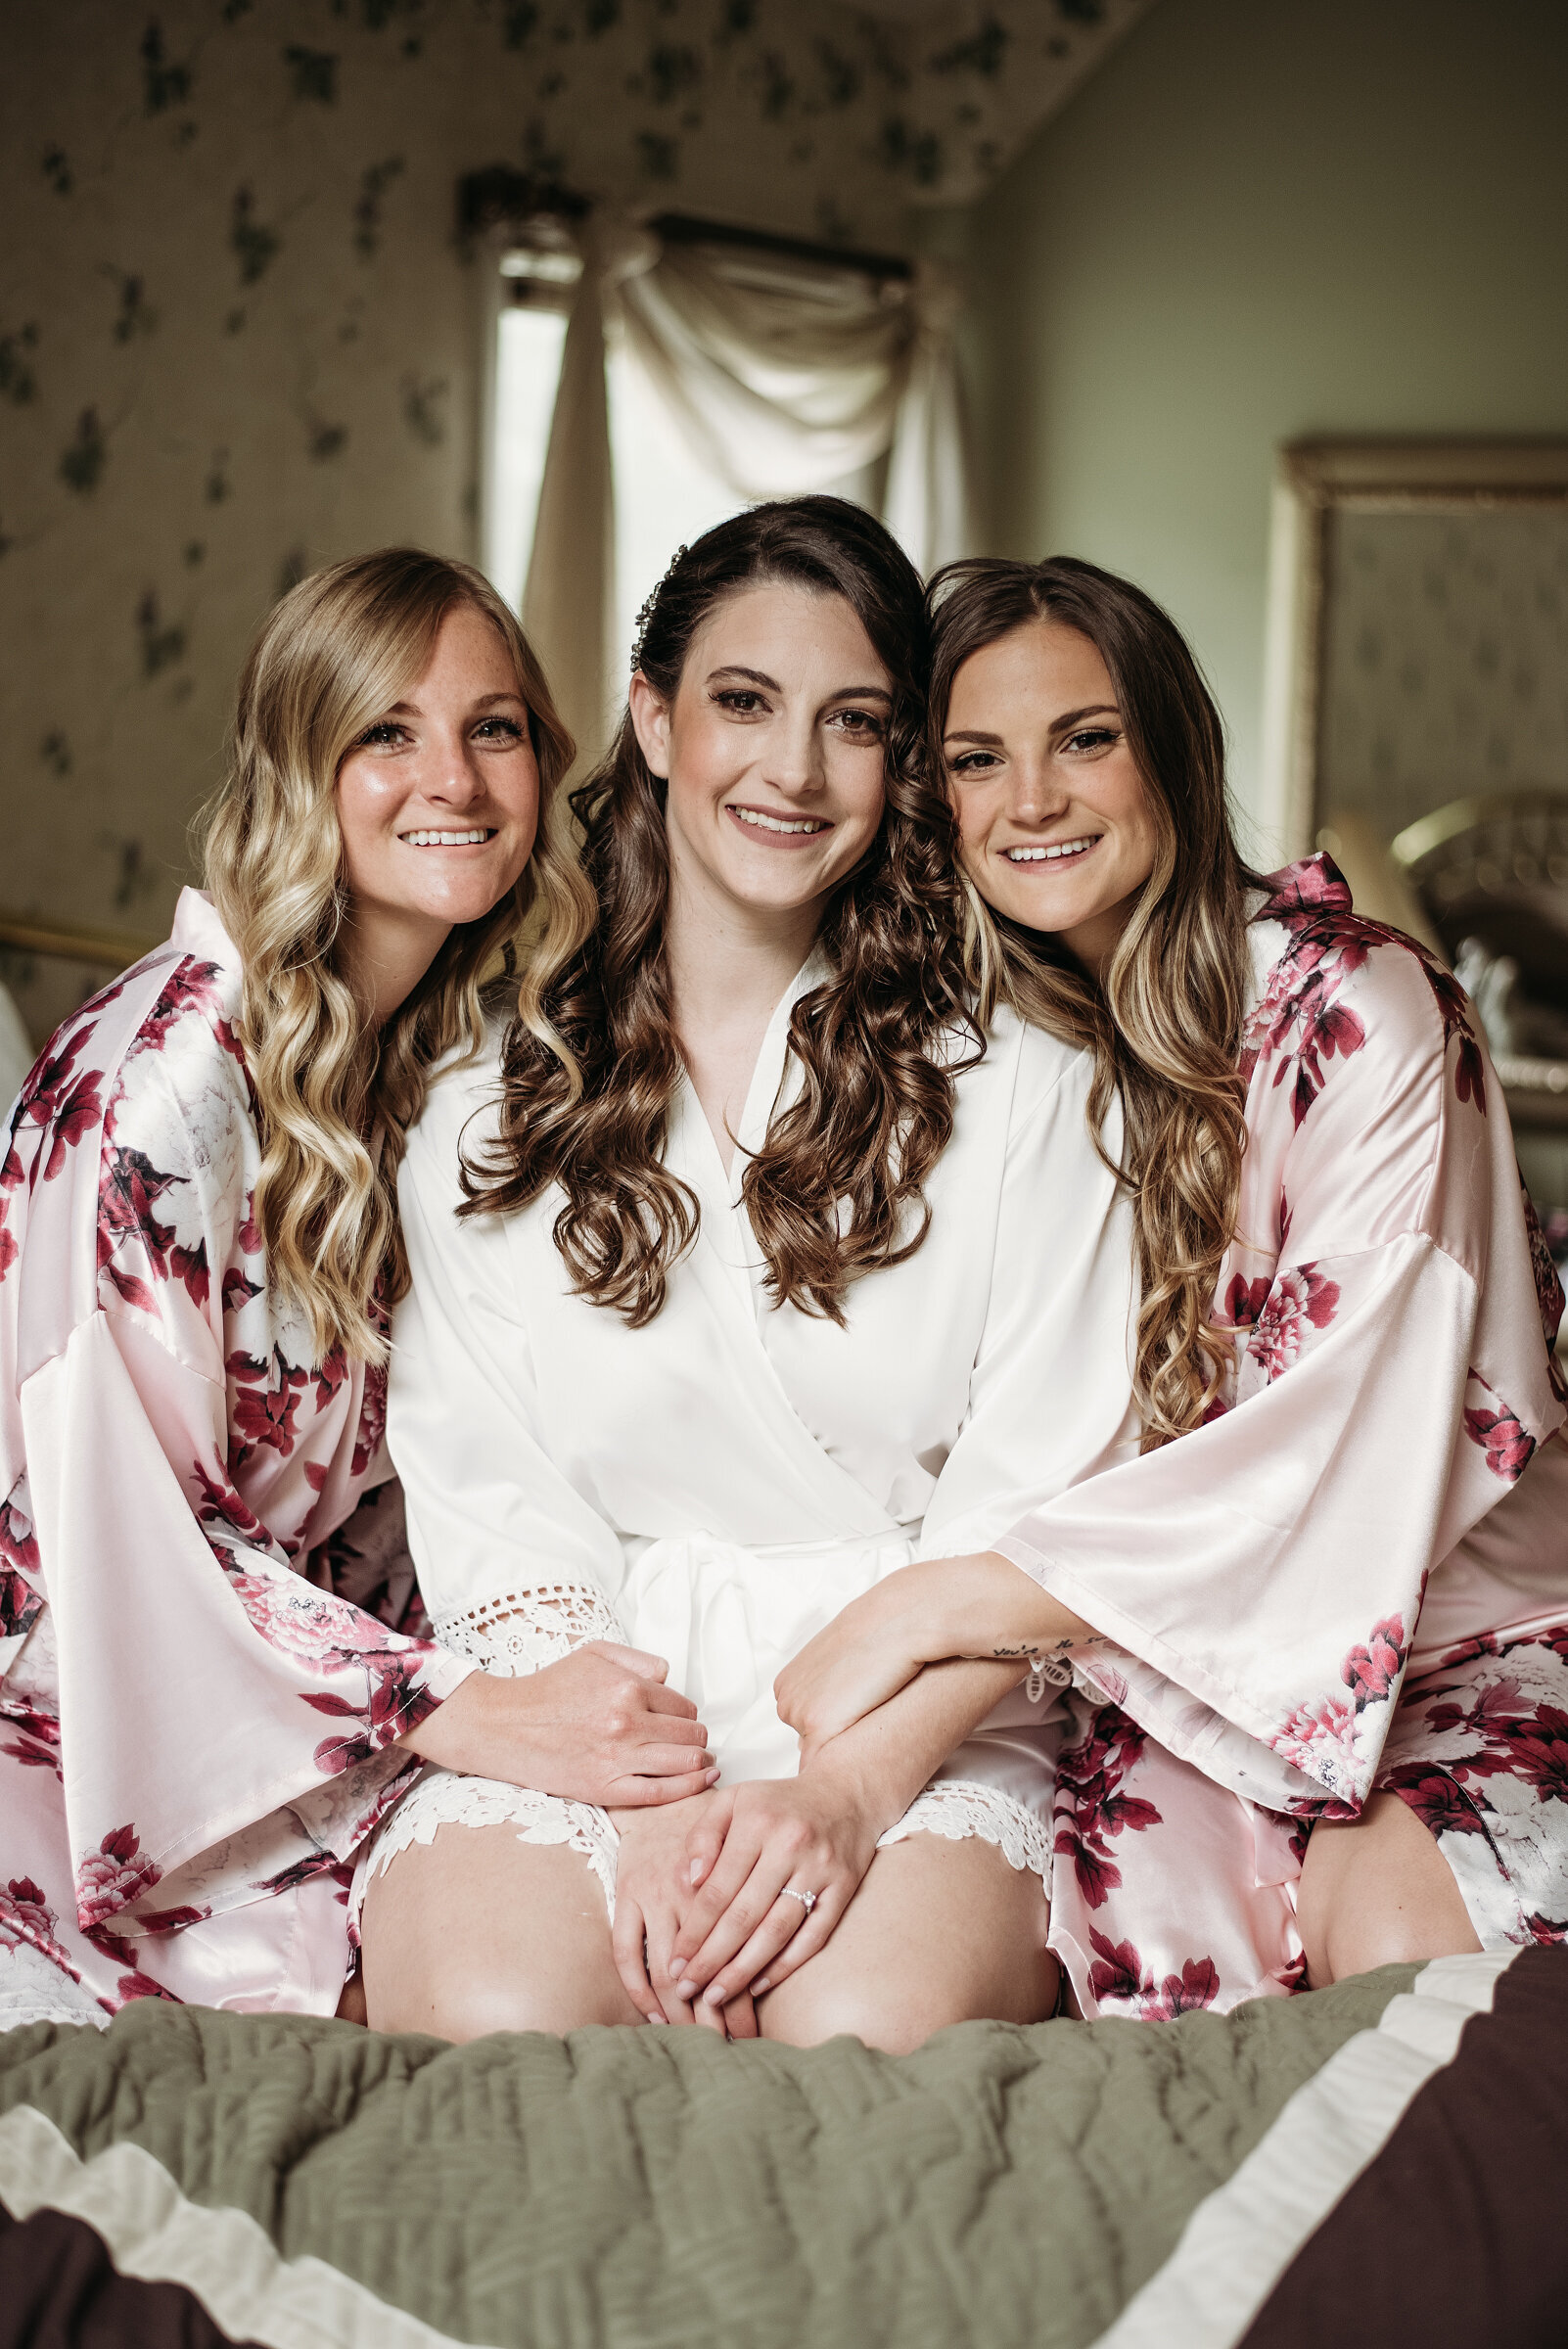 bride+and+bridesmaids+in+robes+getting+ready+_+new+jersey+wedding+photographer.jpeg